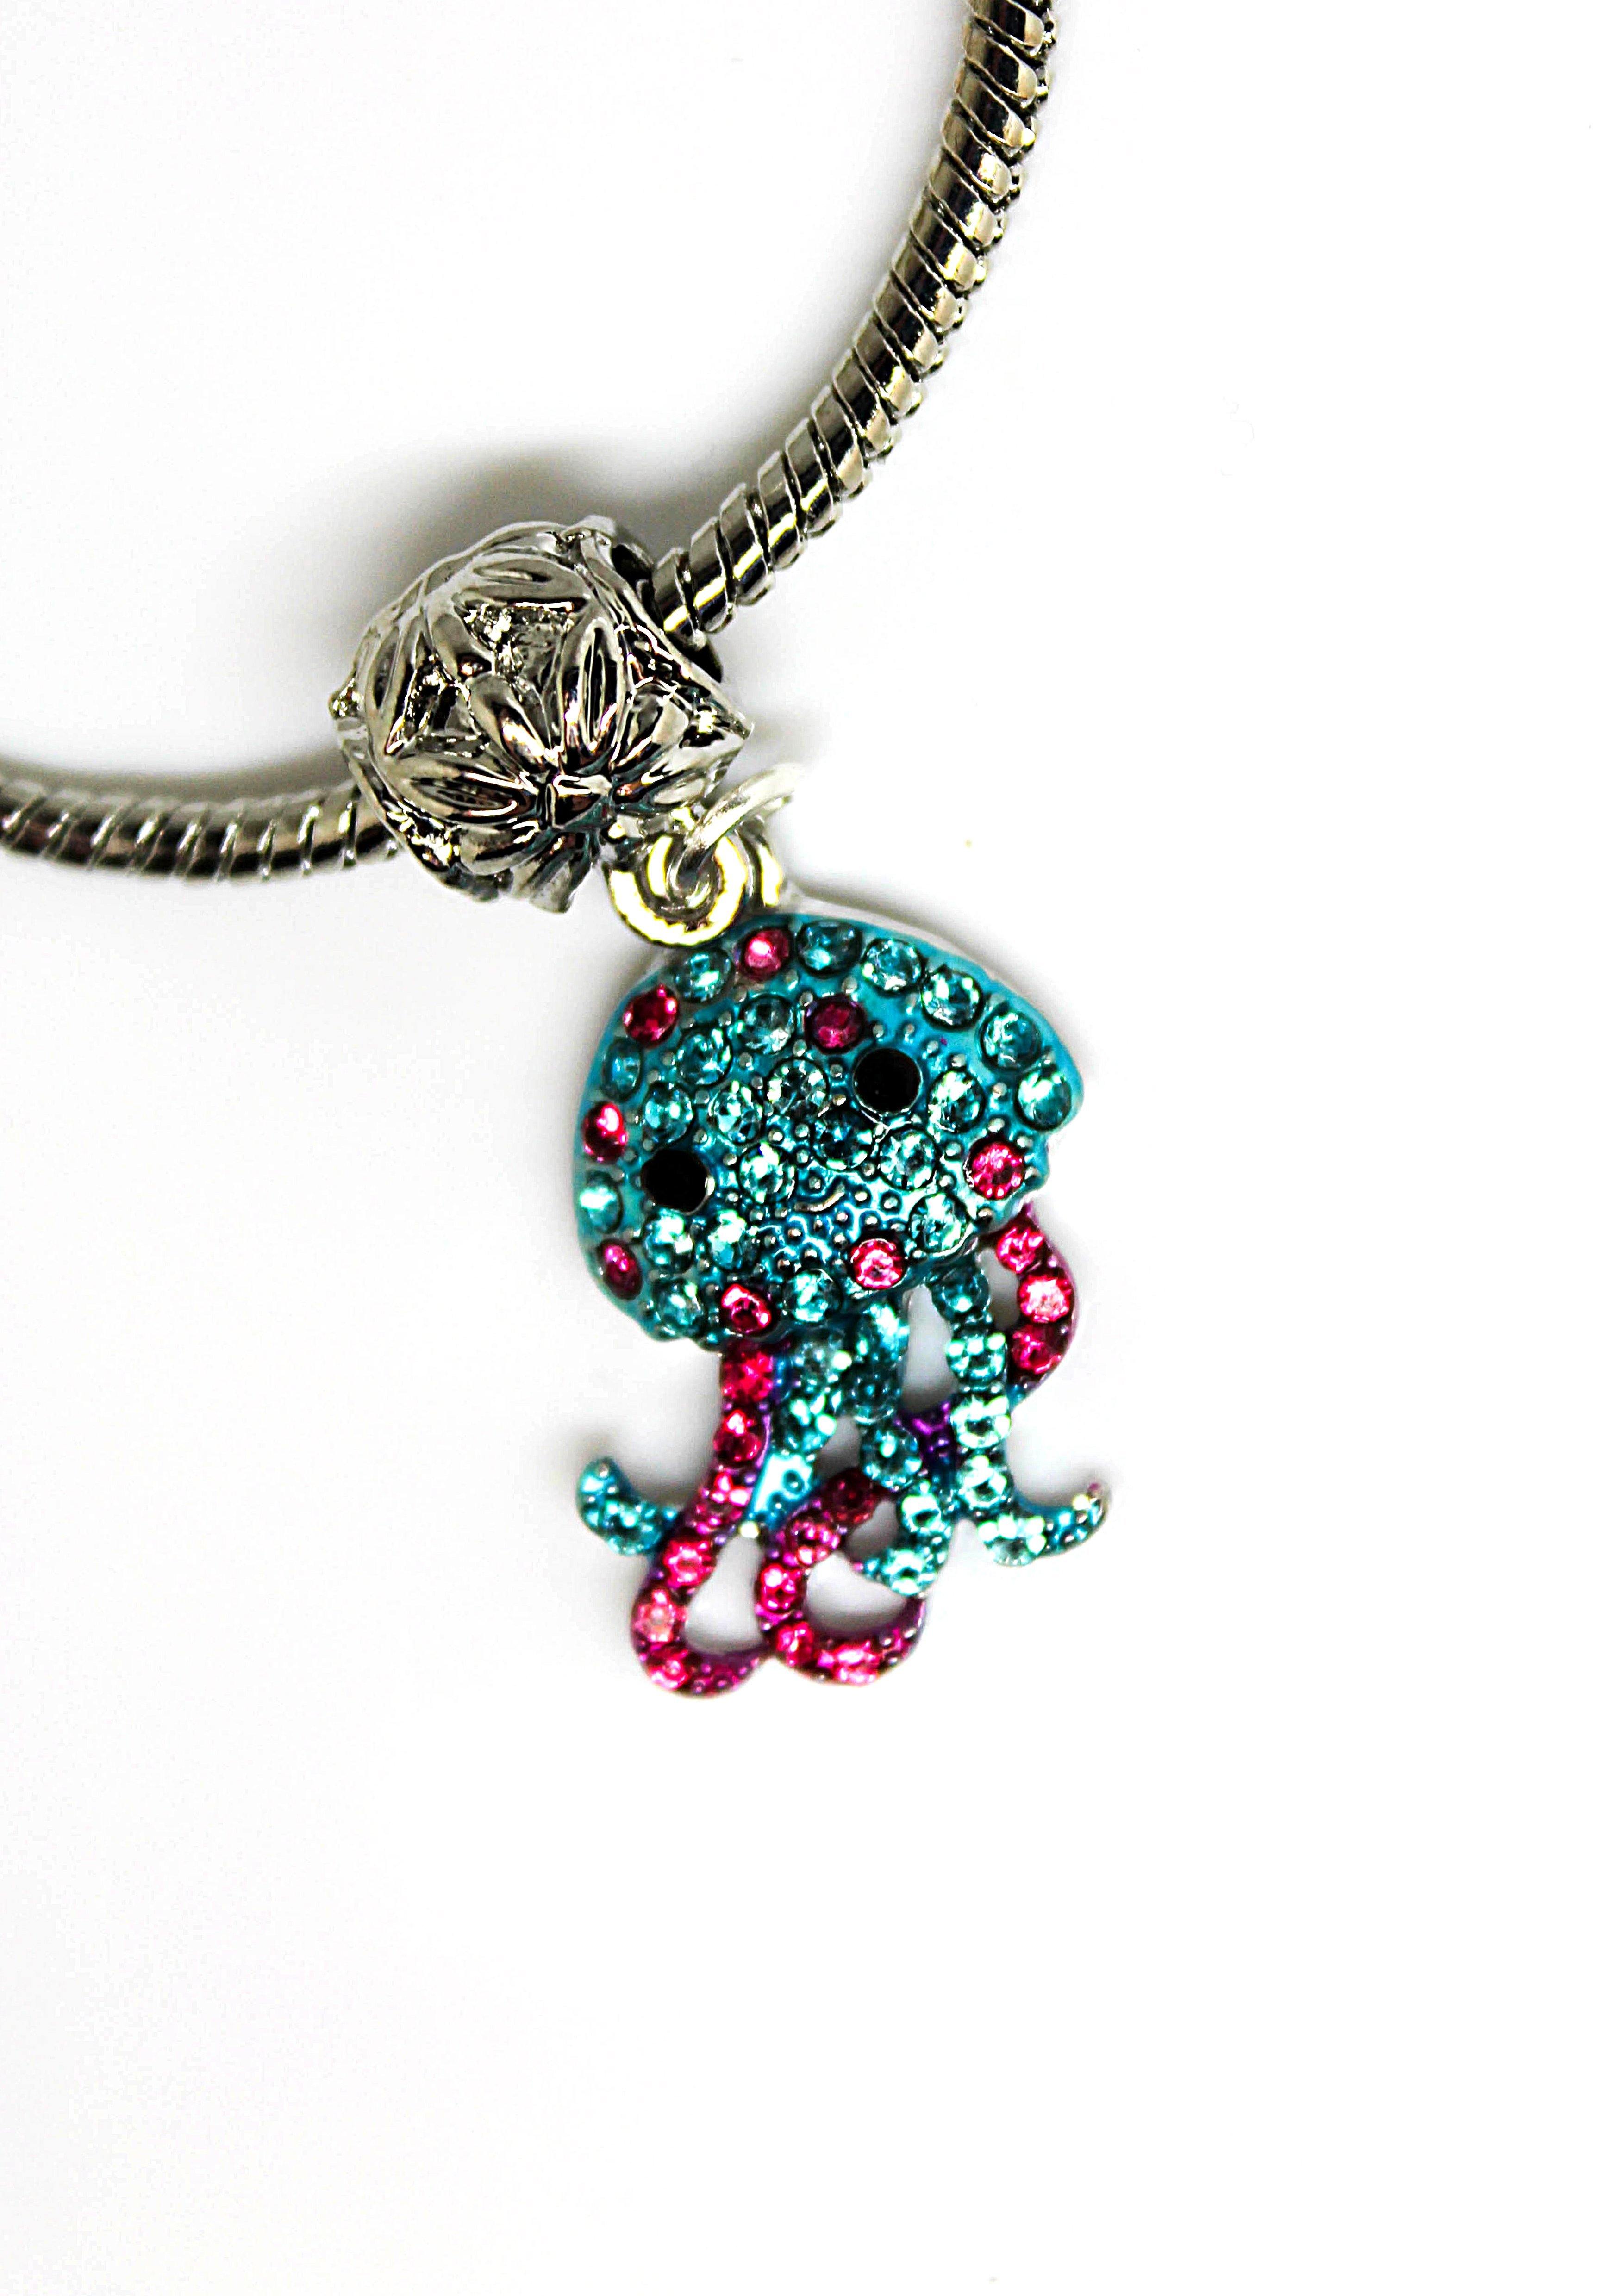 Jelly Fish Blue Charm Bracelet - Wildtouch - Wildtouch